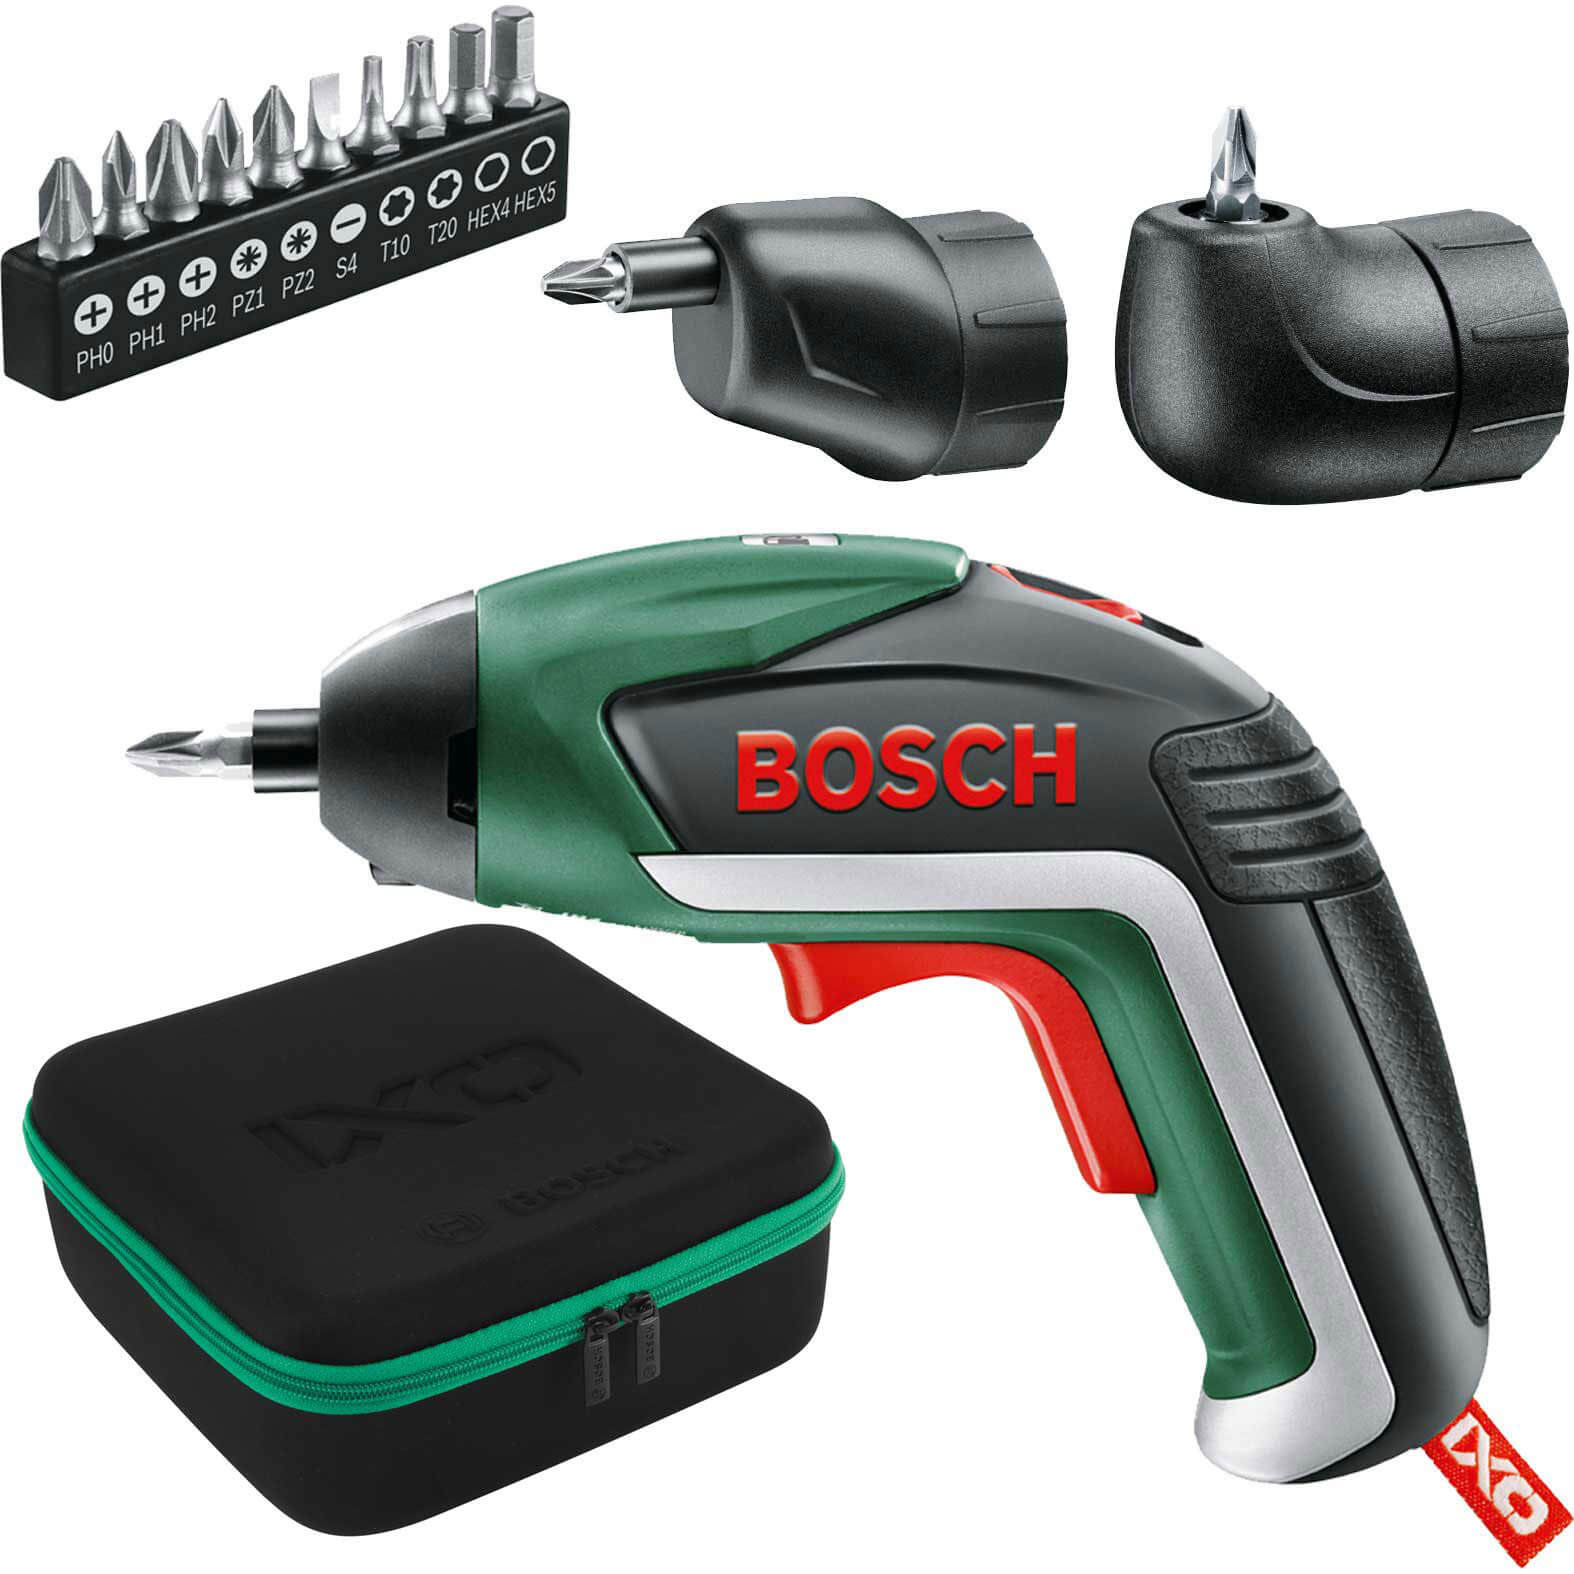 Image of Bosch IXO V 3.6v Cordless Screwdriver and Offset Angle Adaptor 1 x 1.5ah Integrated Li-ion Charger Case